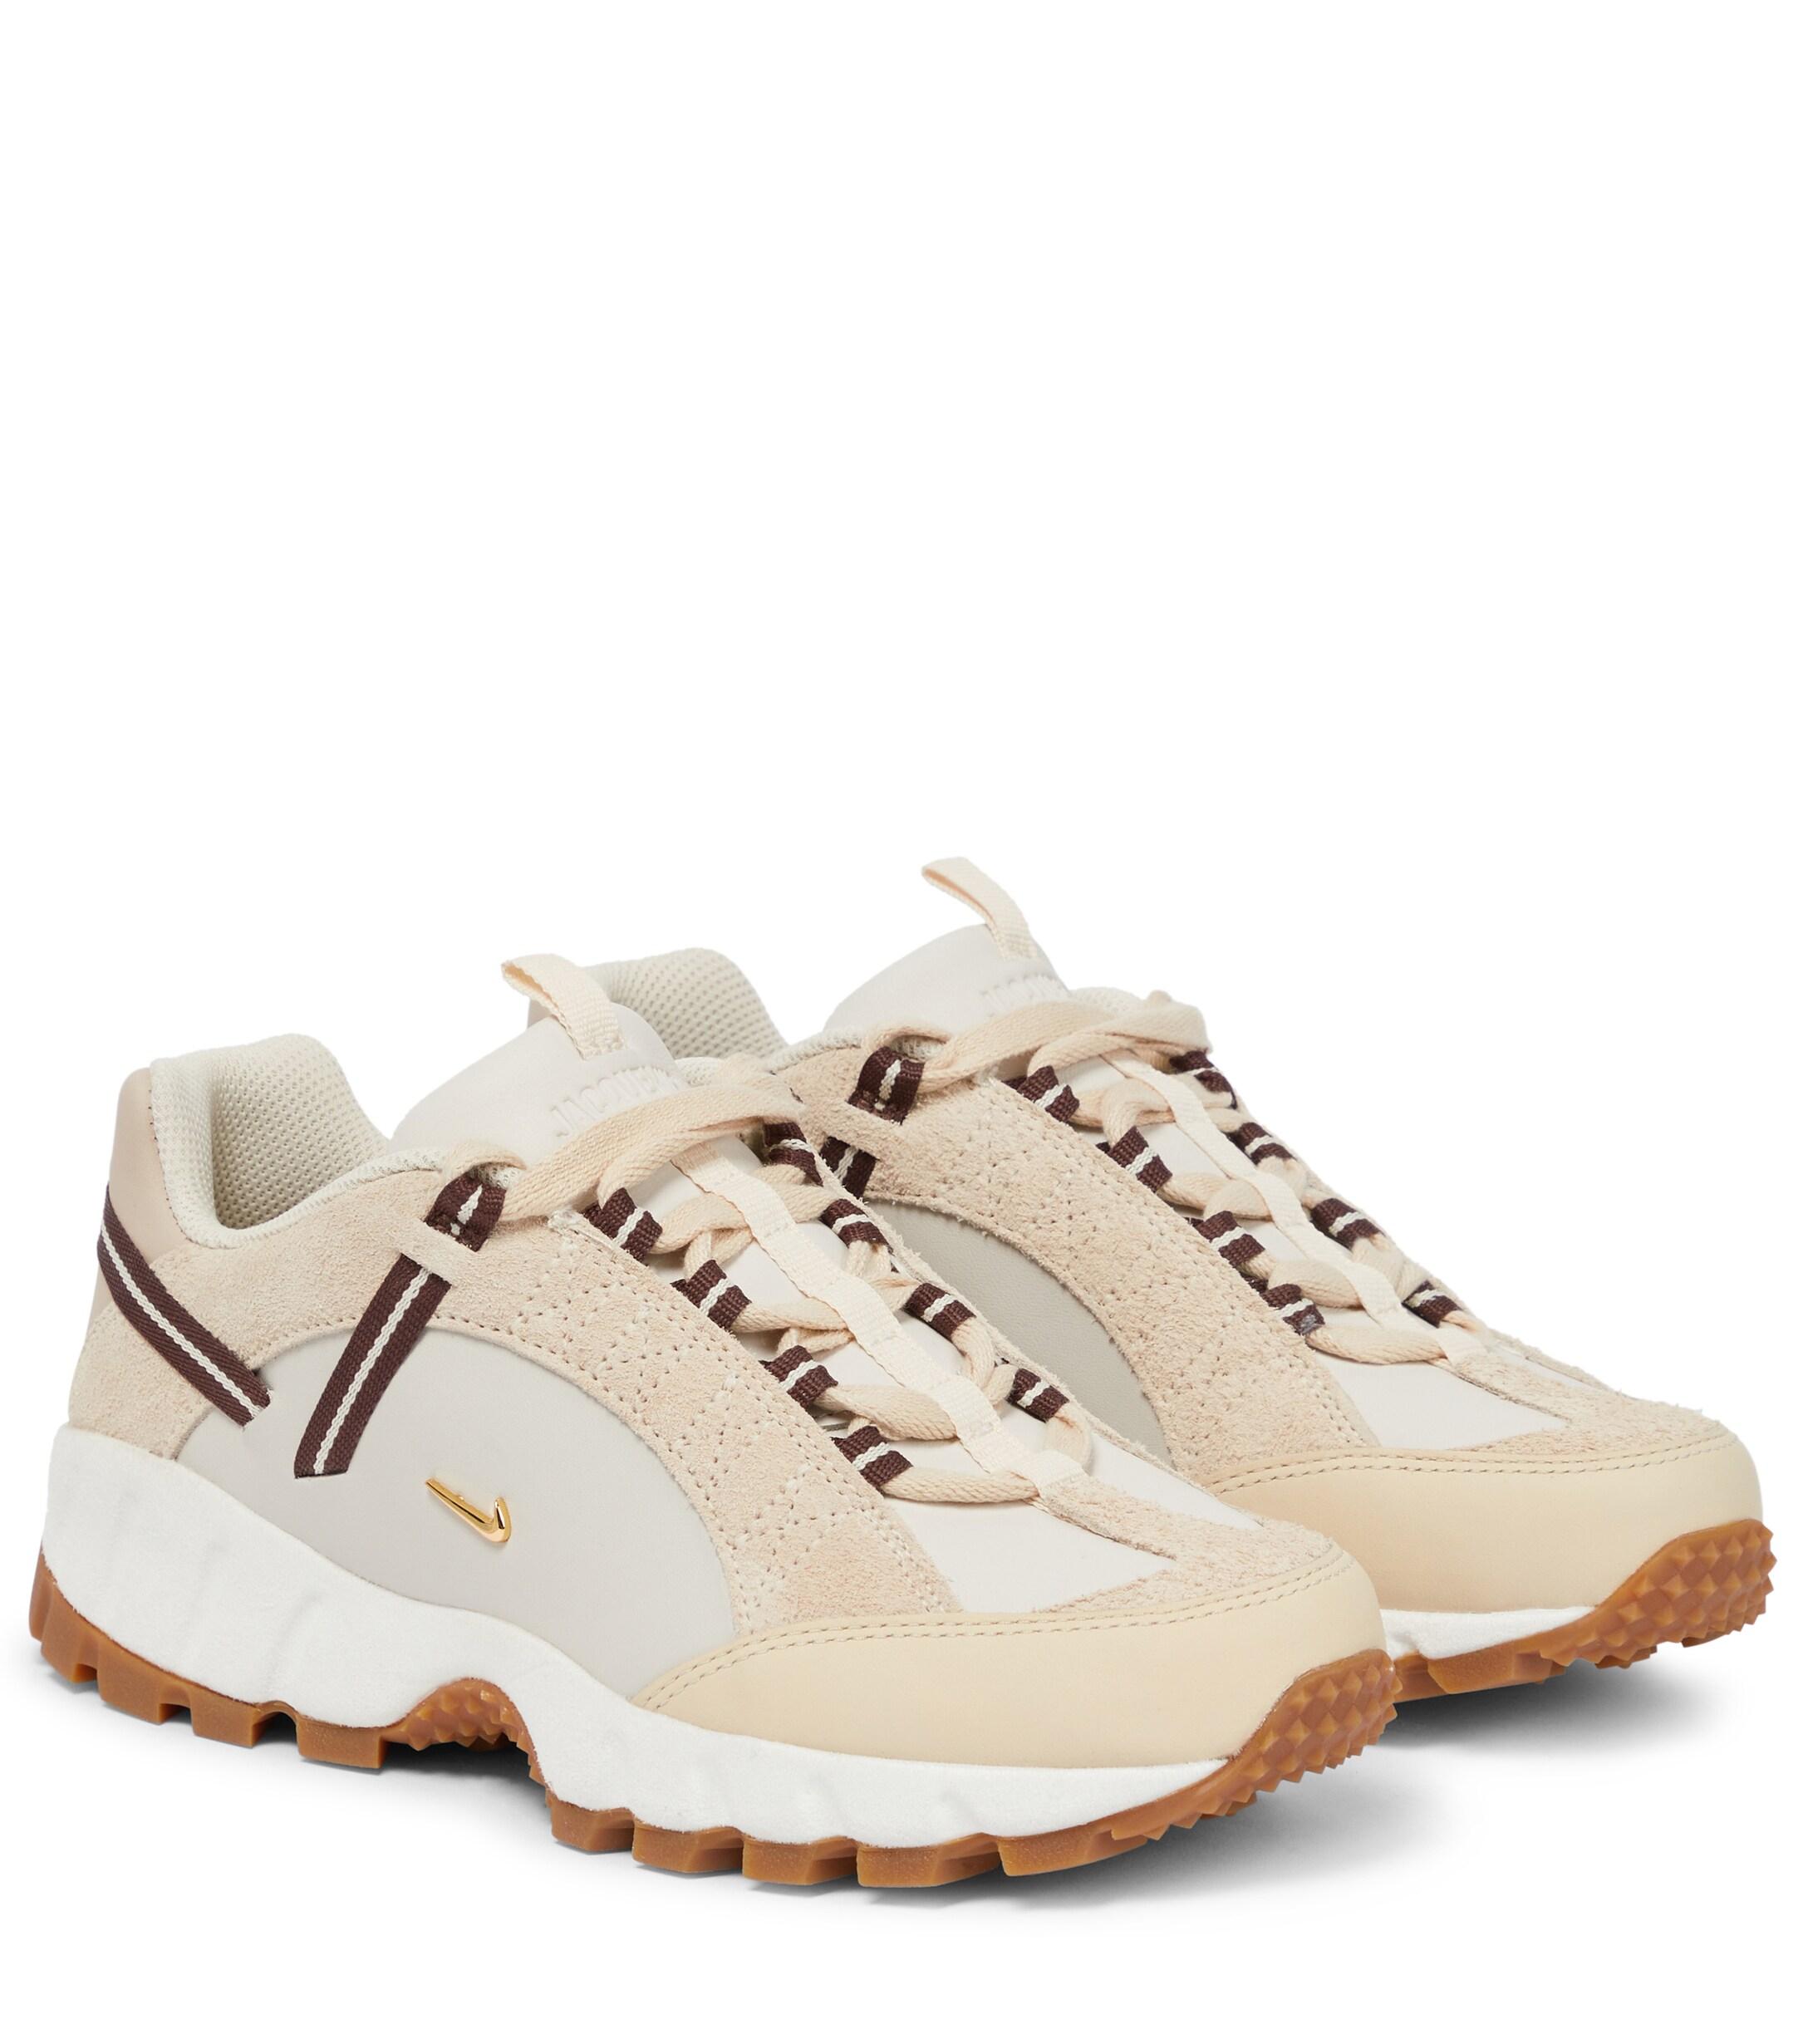 Nike X Jacquemus Air Humara Suede And Leather Sneakers in Beige ...